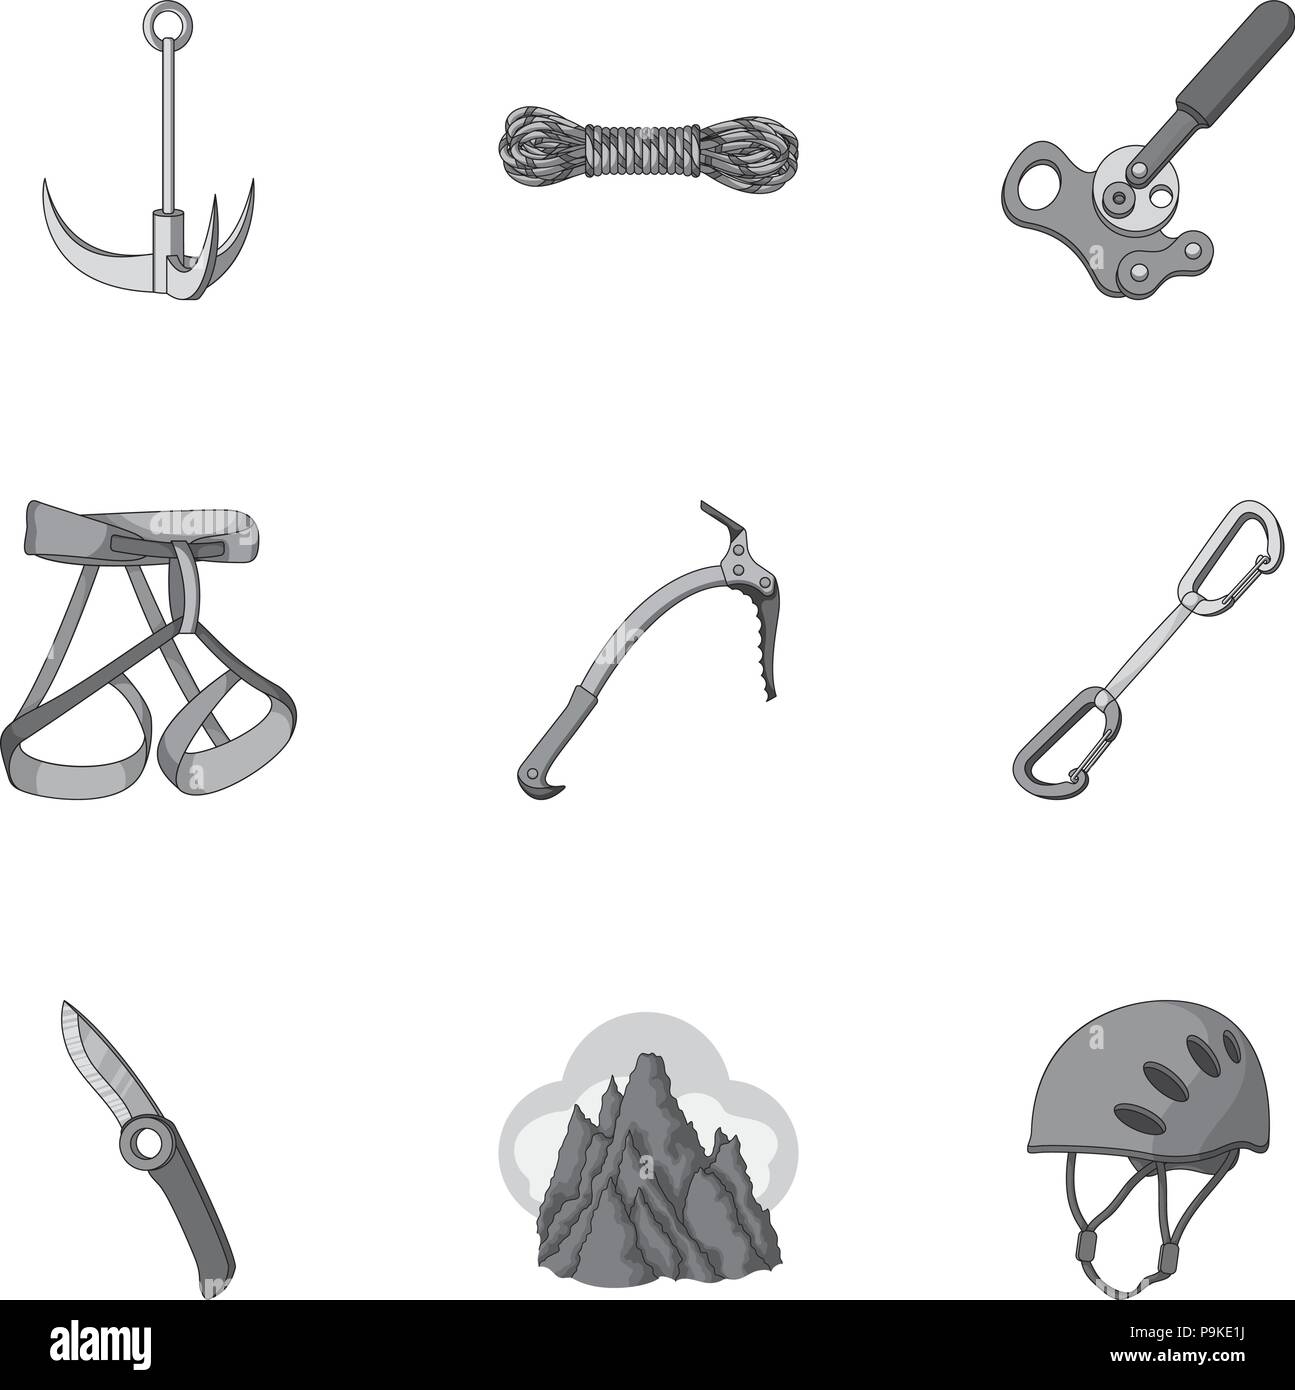 ax,boots ,bunch,carbine,clamp,climber,climbing,clog,clouds,collection,conquered,conquest,crampons,different, equipment ,glacier,hammer,hank,helmet,hook,ice,icon,illustration,insurance,isolated,jumar,kinds,knife,logo,monochrome,mountain, mountaineering